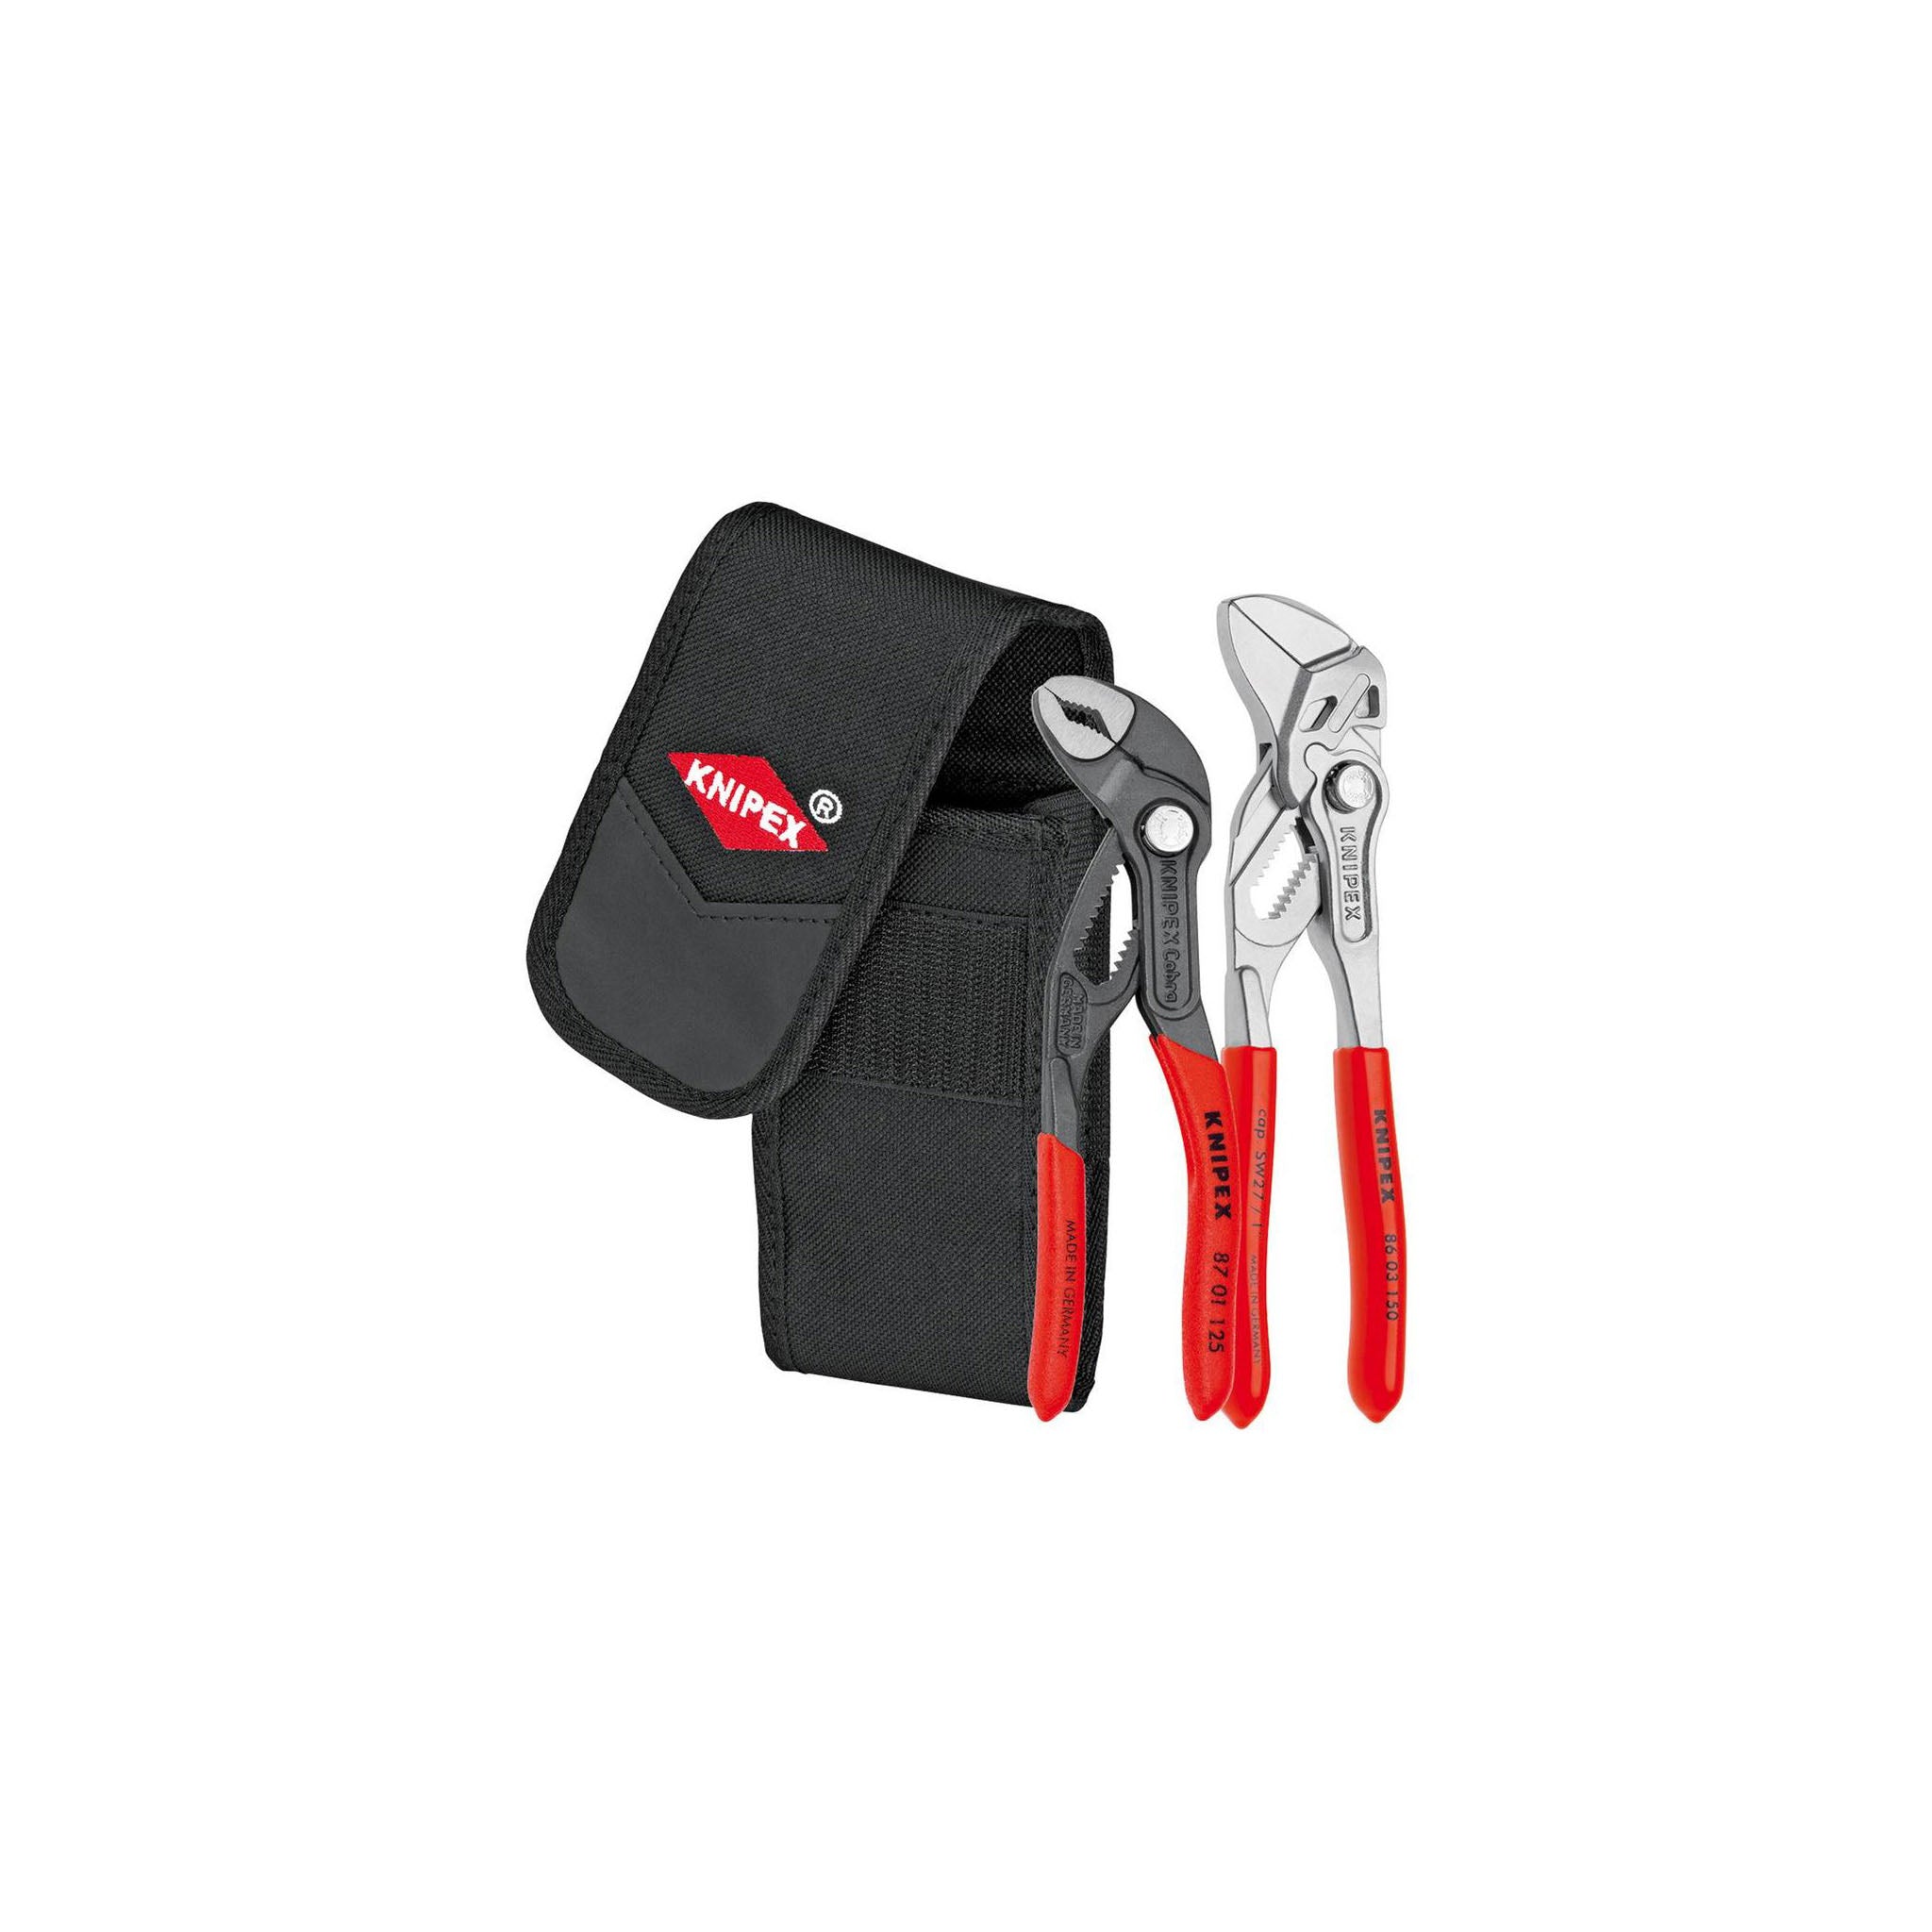 Knipex 00 20 72 V01 2 Piece Set Mini Pliers in Belt Pouch